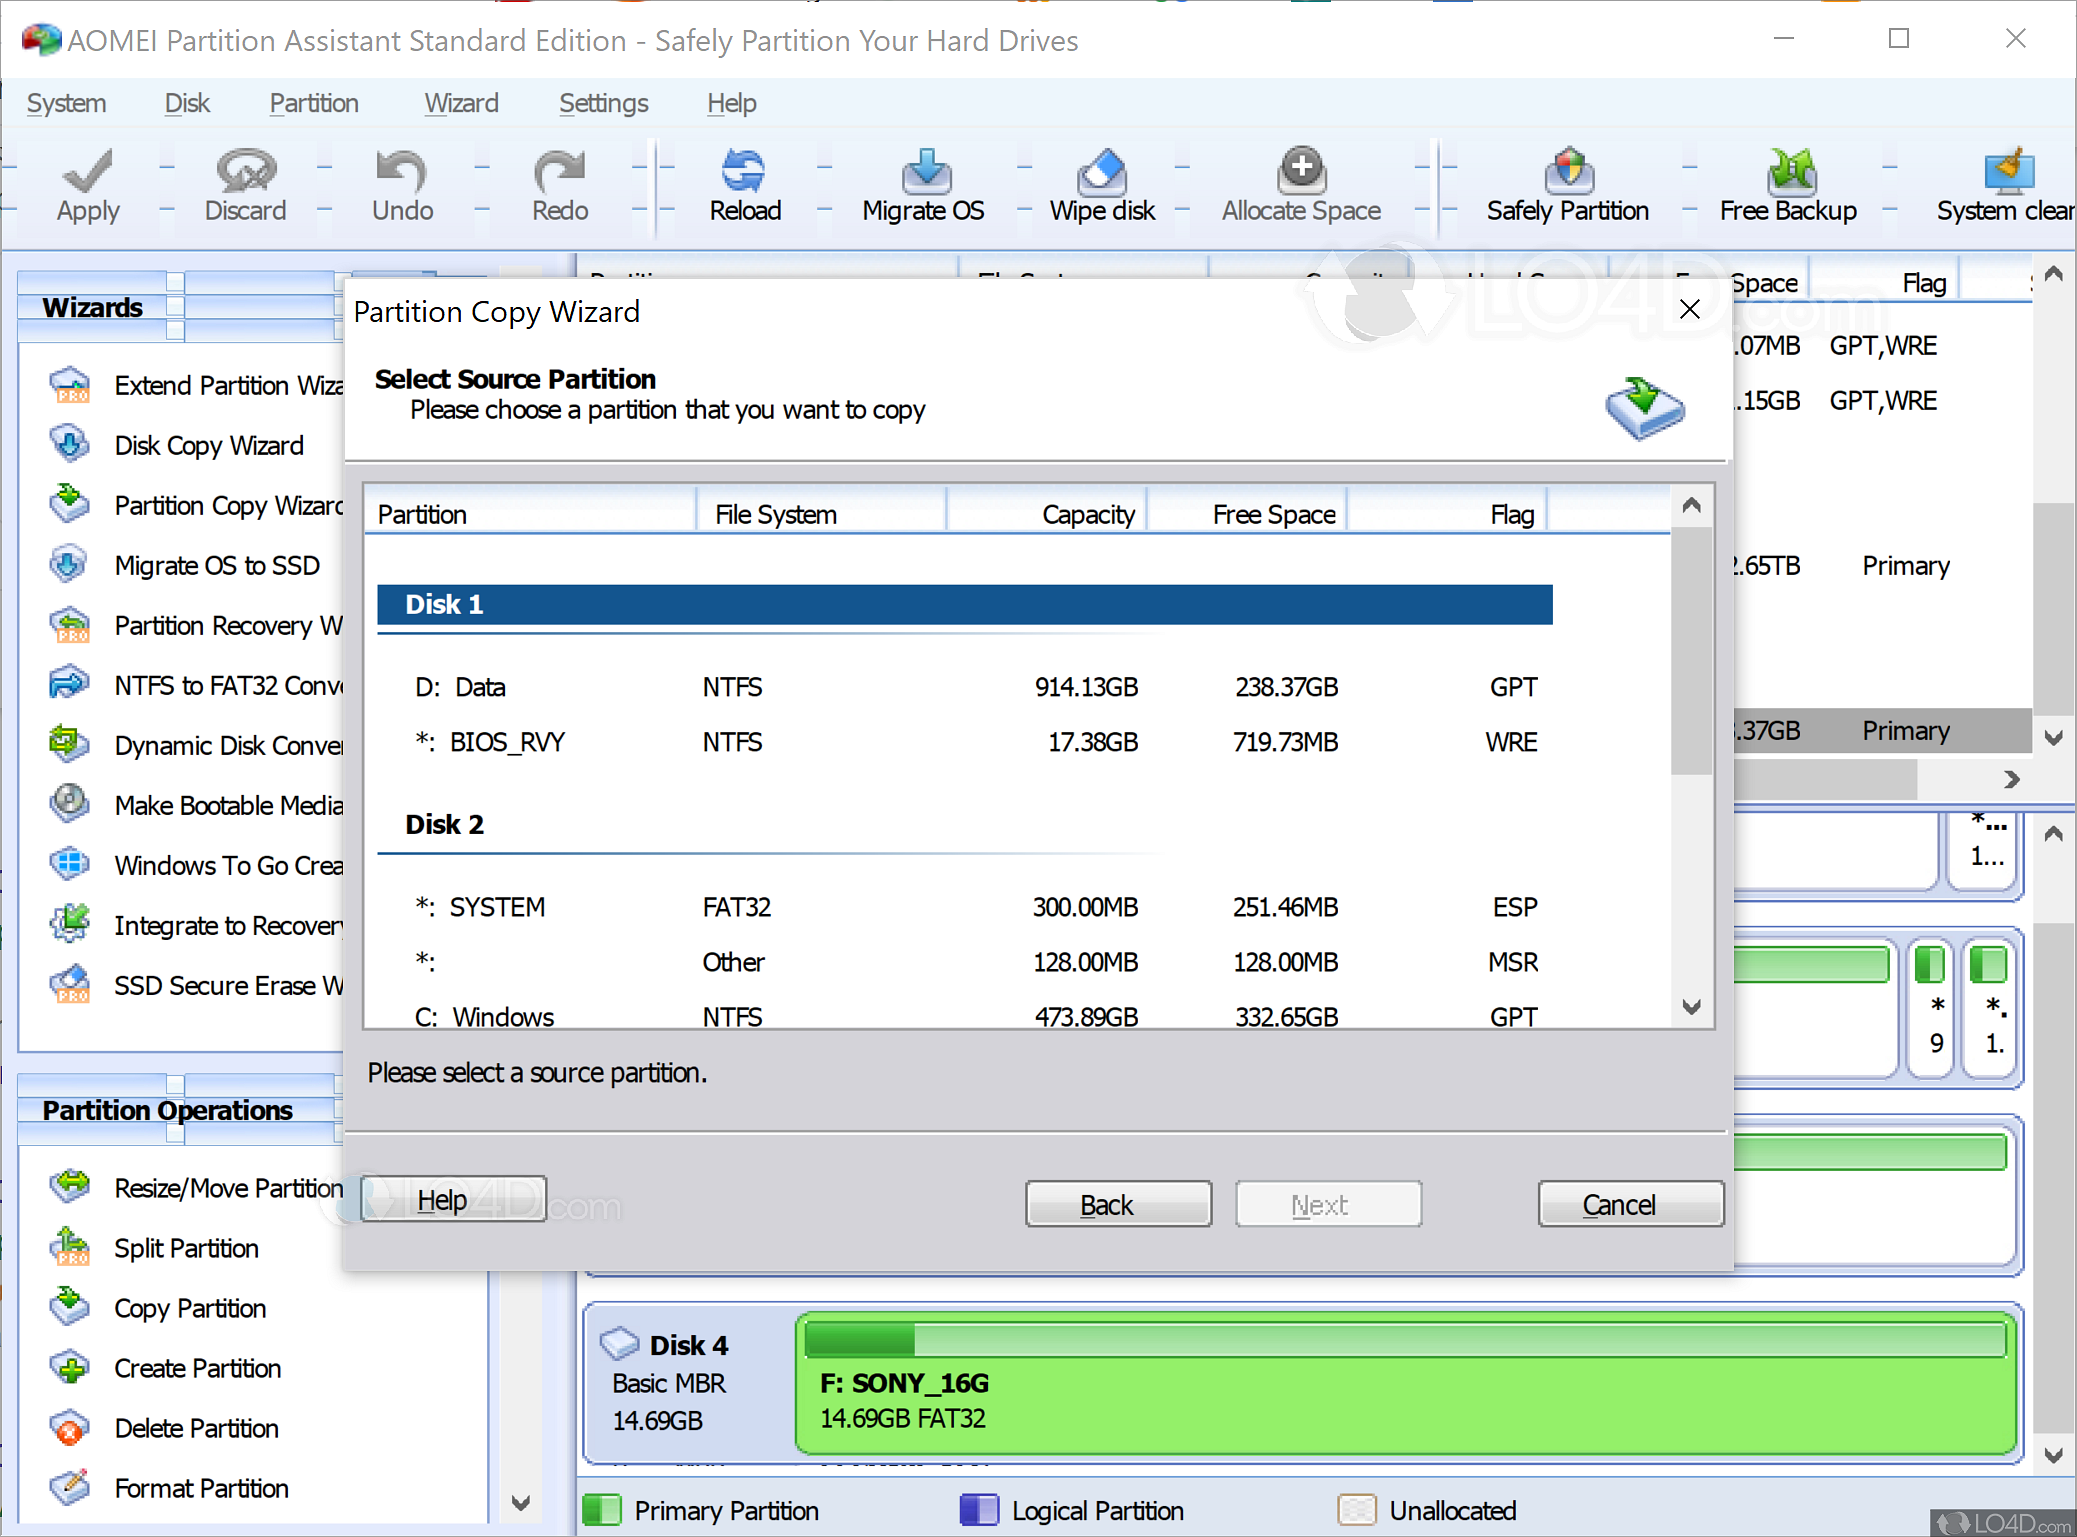 instal the new version for windows AOMEI Partition Assistant Pro 10.2.1